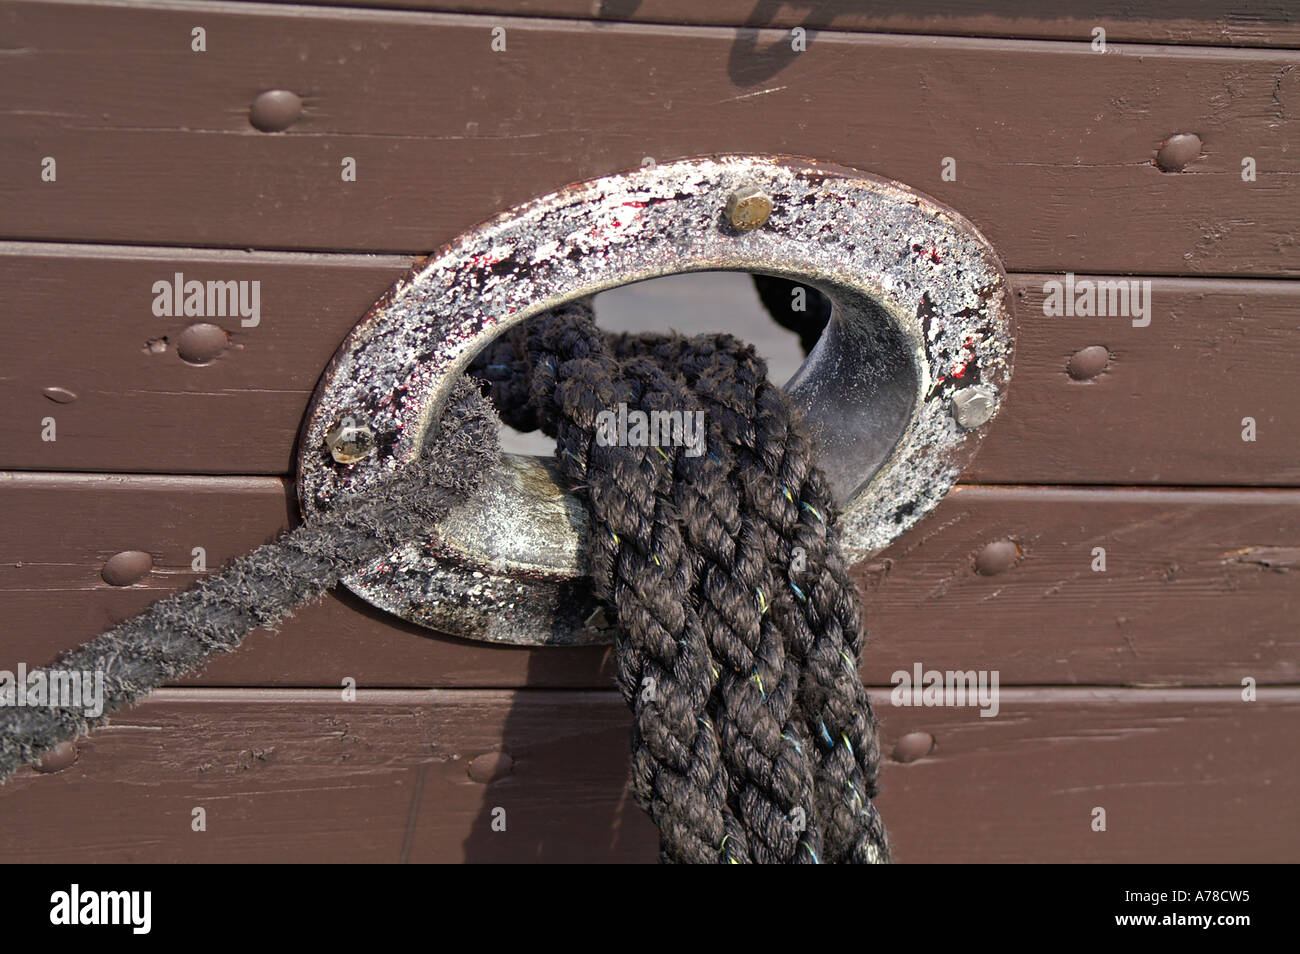 Detail Boat anchor rope hole Stock Photo - Alamy